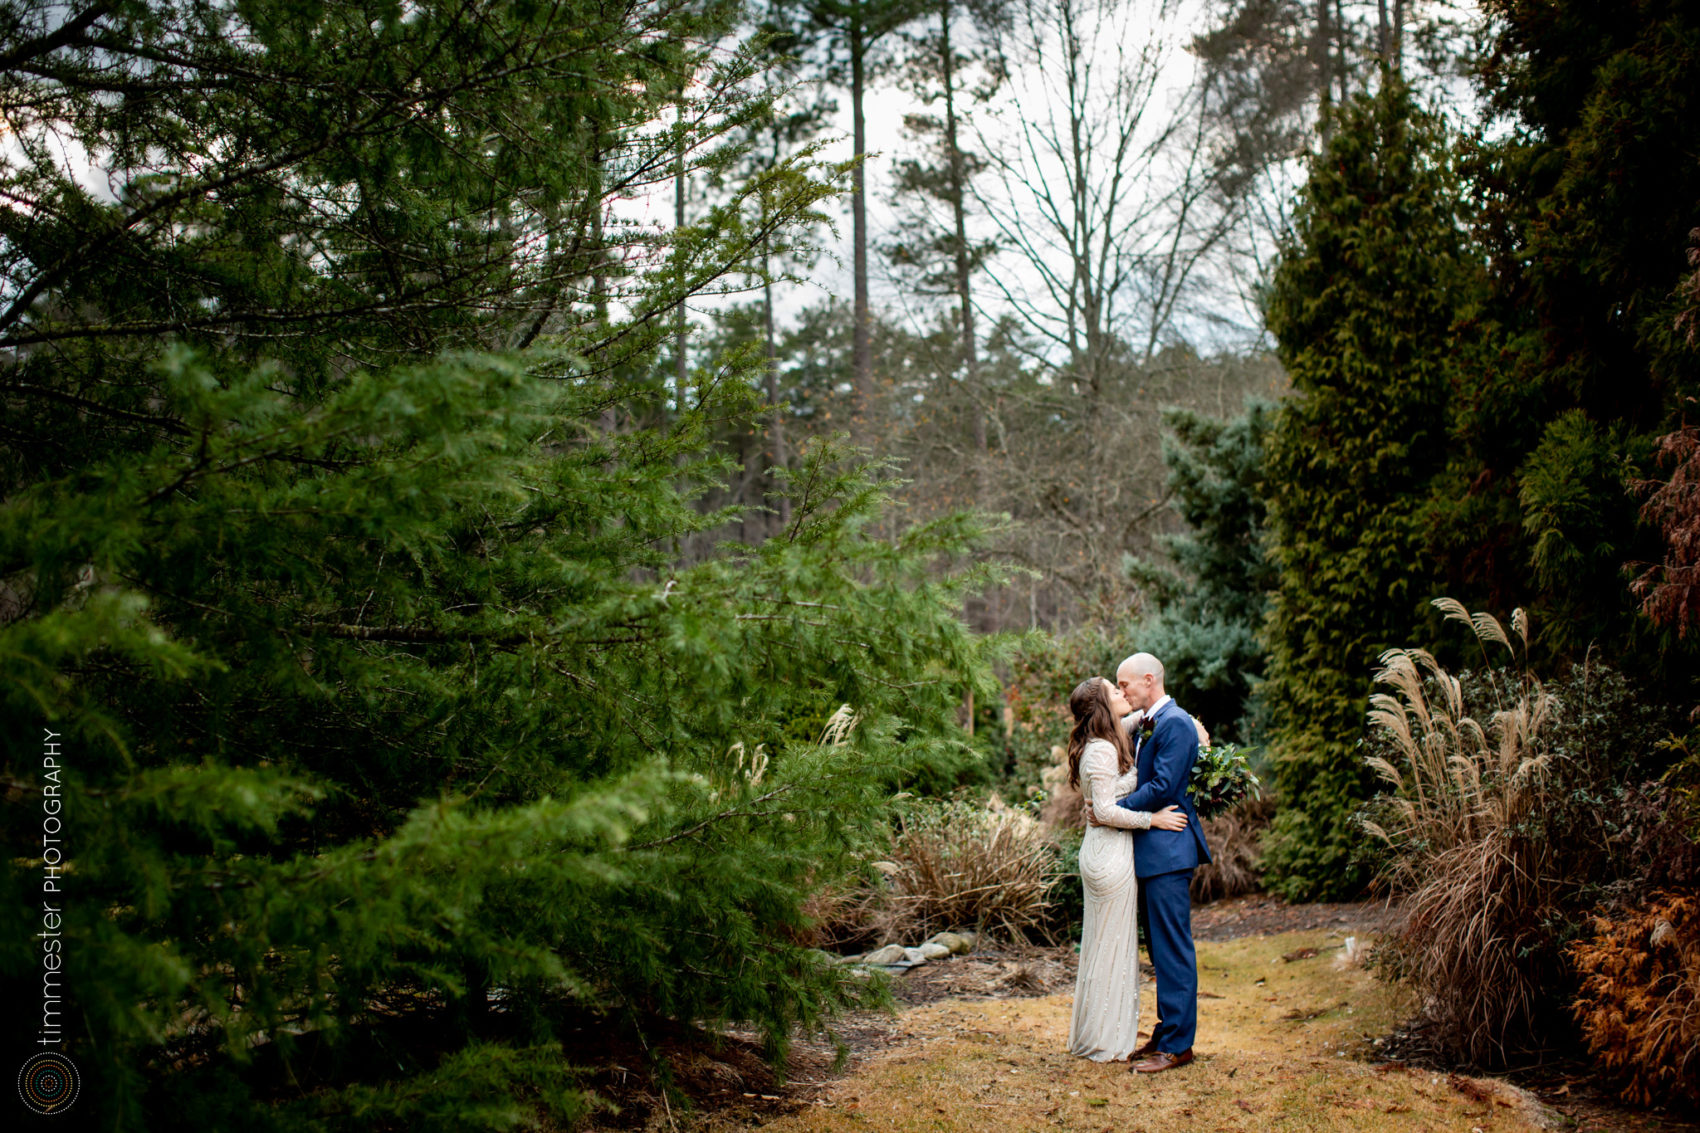 A wedding at Chapel Hill Carriage House in North Carolina